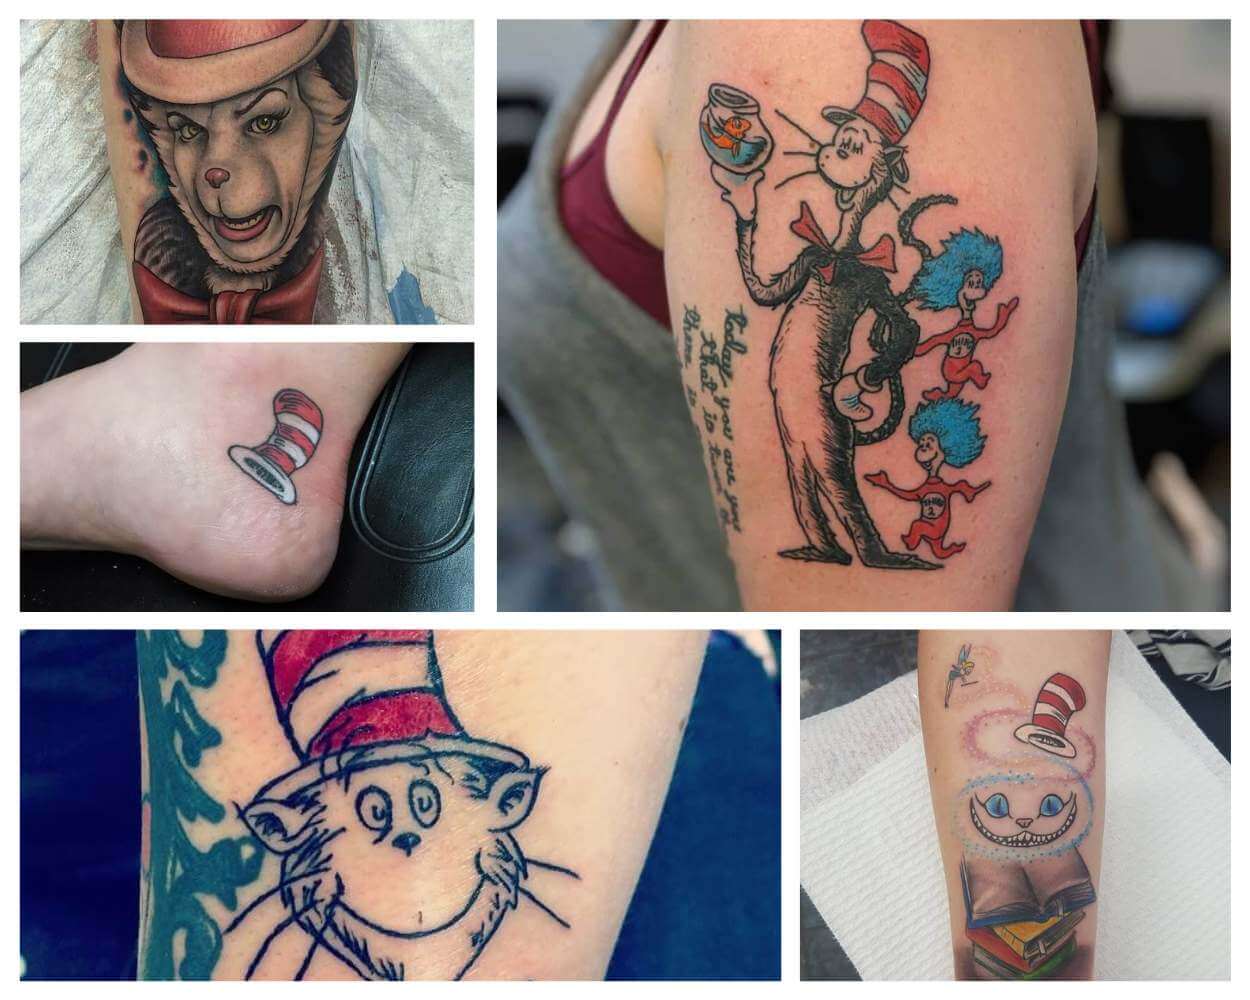 Cat in the Hat tattoos